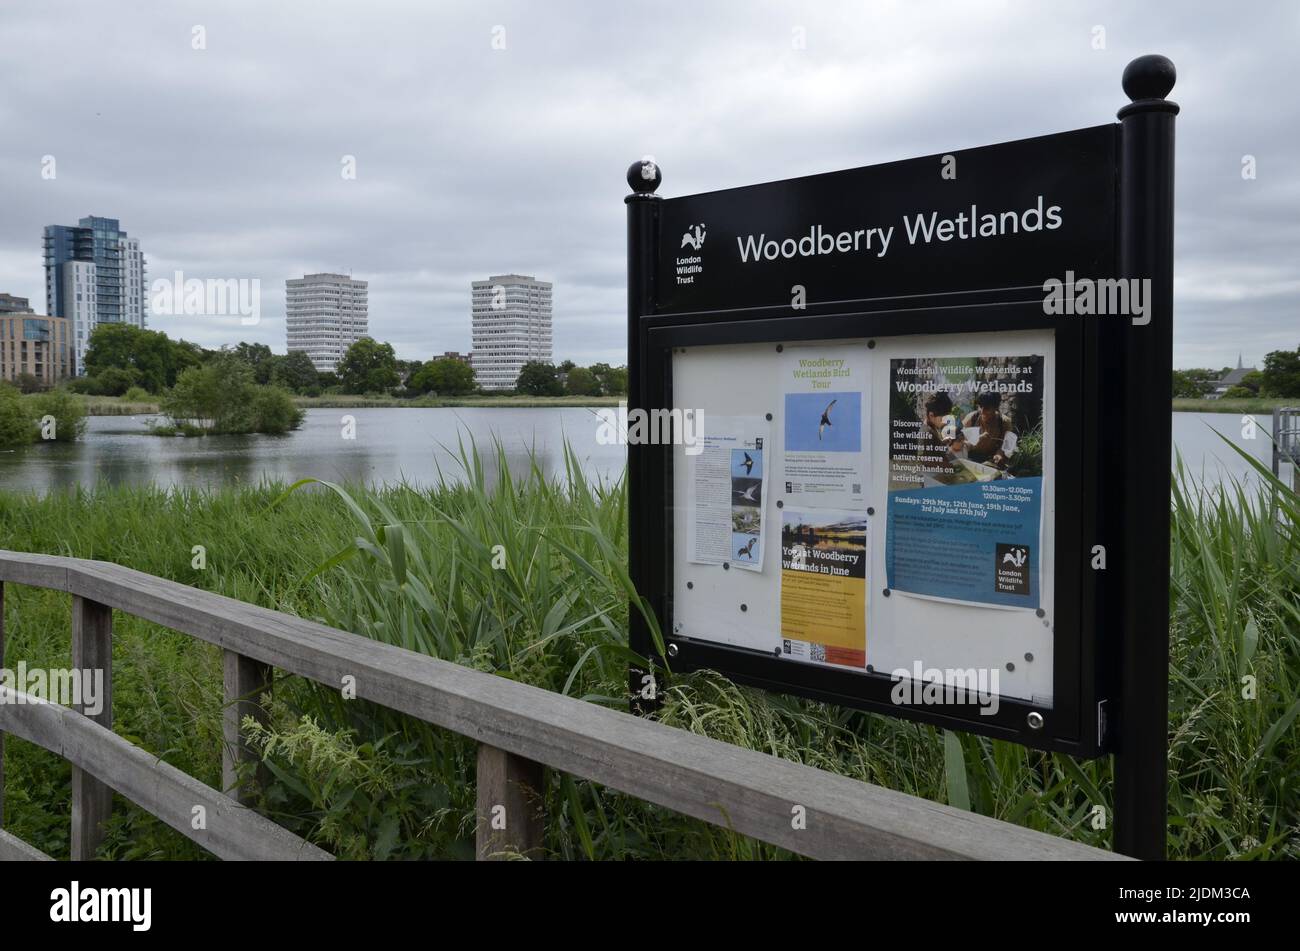 Woodberry Wetlands, an urban nature reserve in Stoke Newington, London Stock Photo